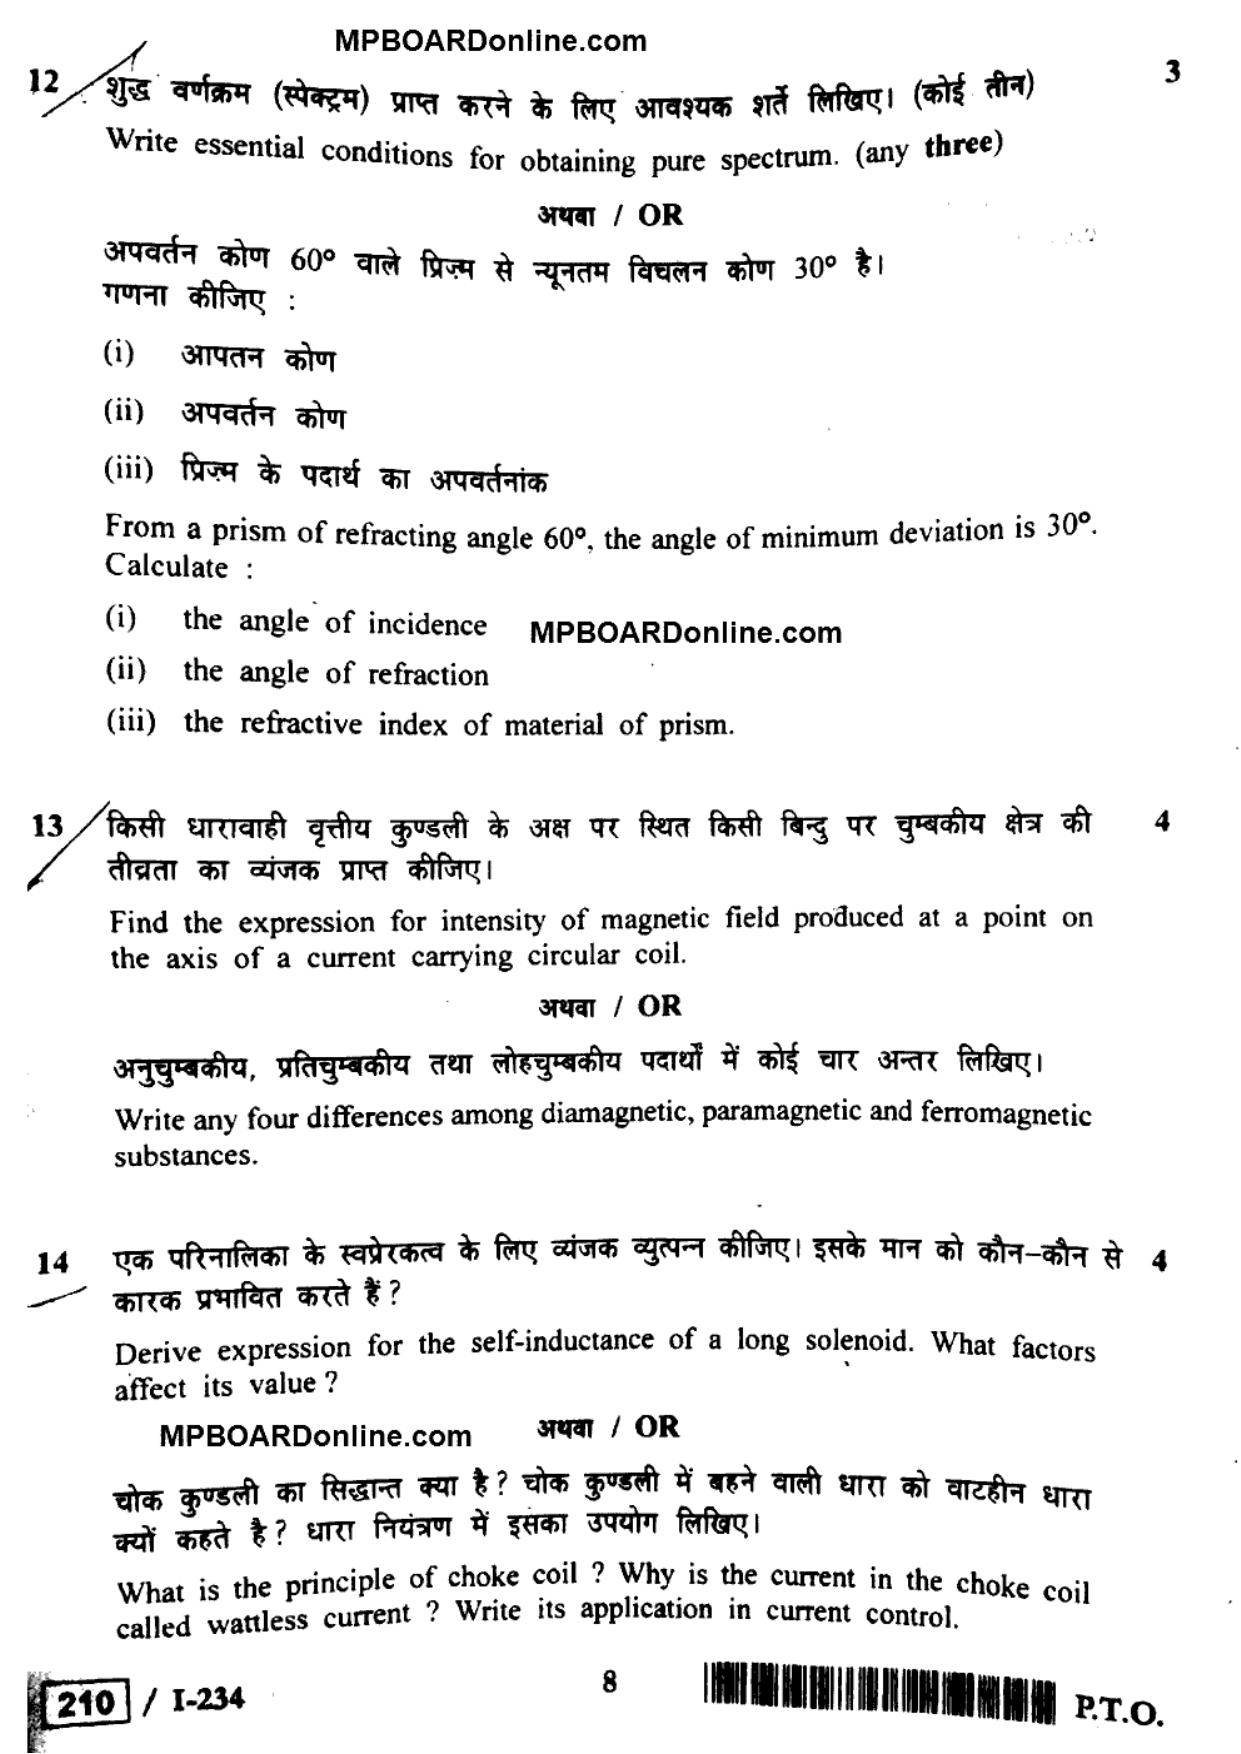 MP Board Class 12 Physics 2018 Question Paper - Page 8